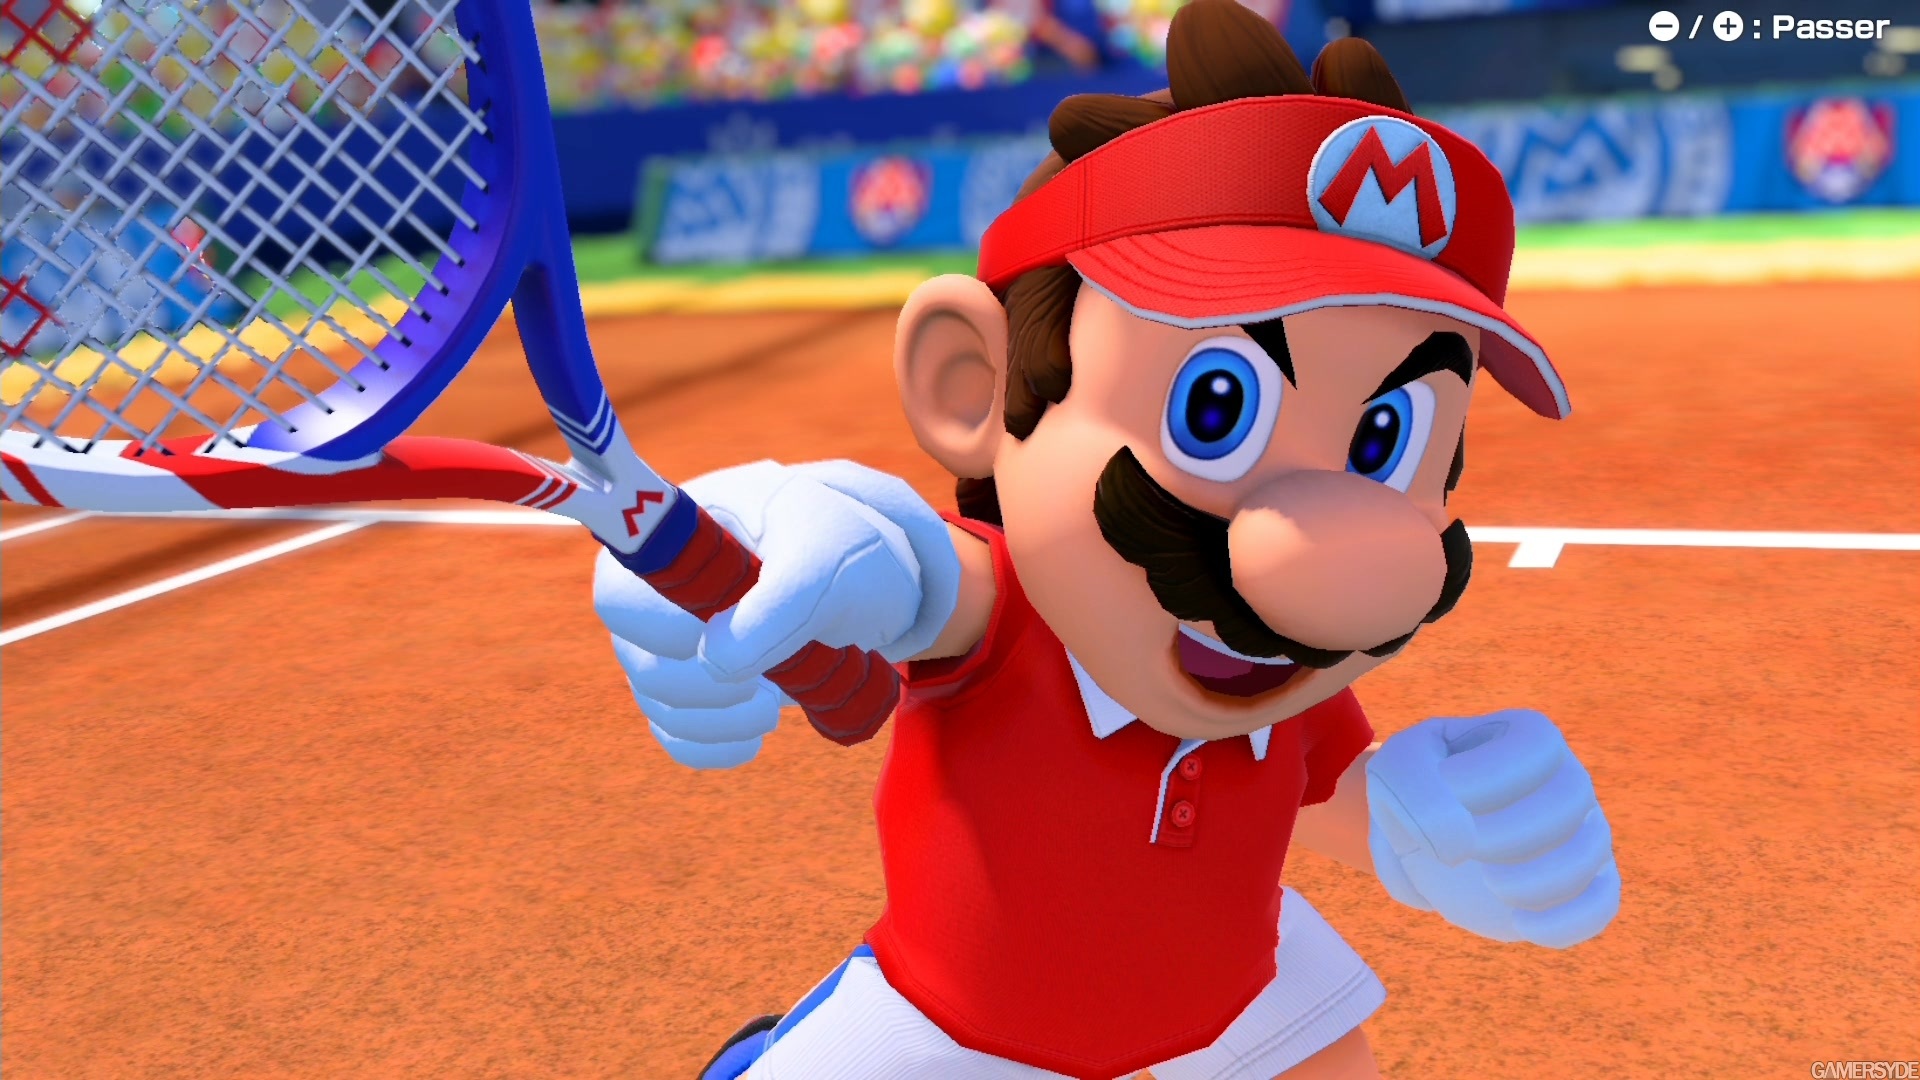 Mario Tennis Aces Switch Gameplay 1 High quality stream and